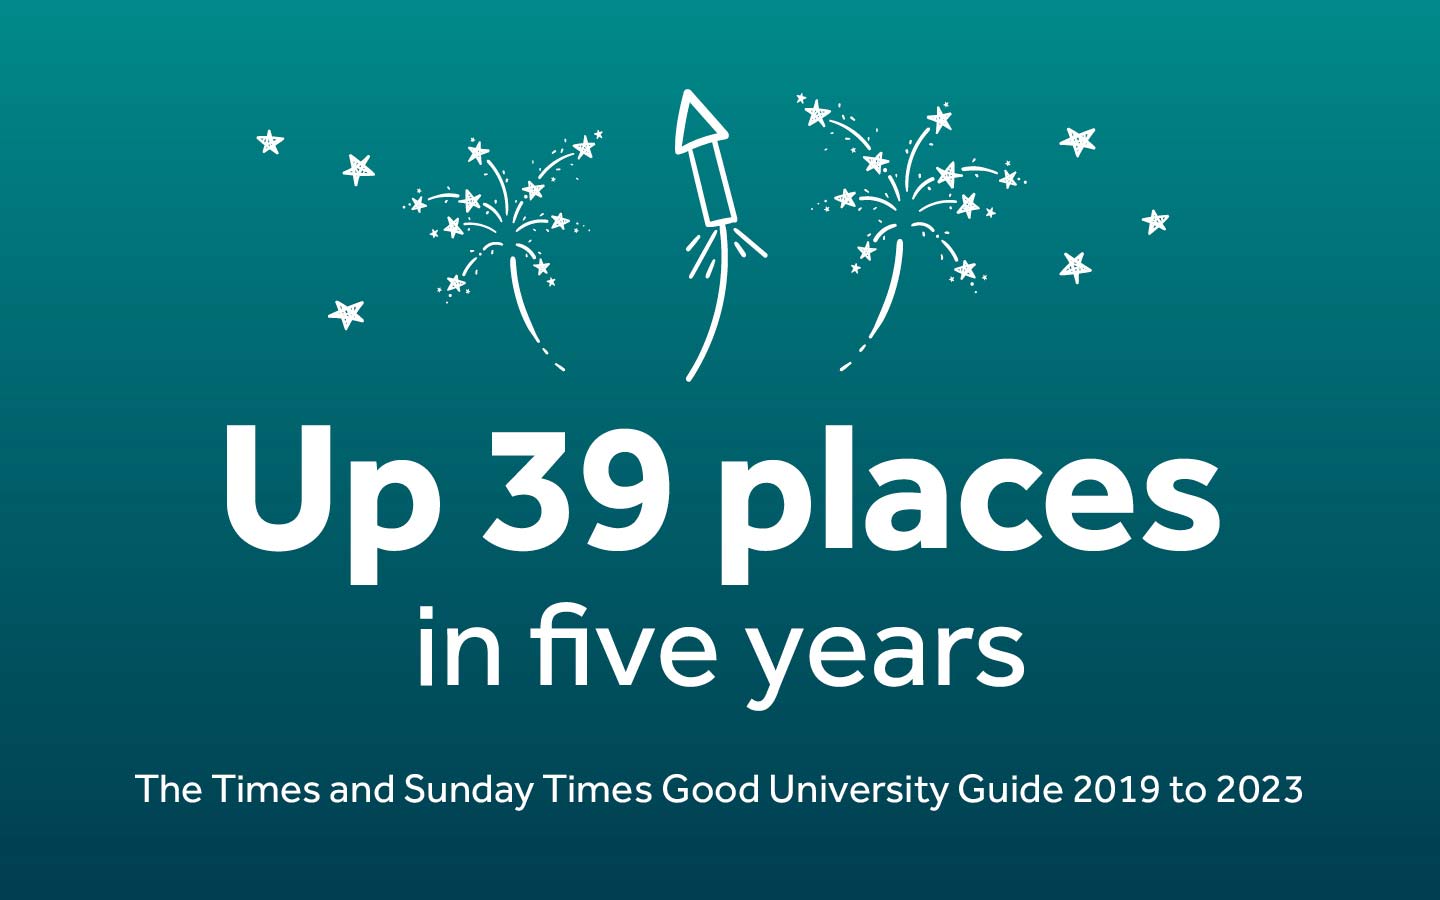 up 39 places in 5 yeas for the Good University Guide 2019 - 2023